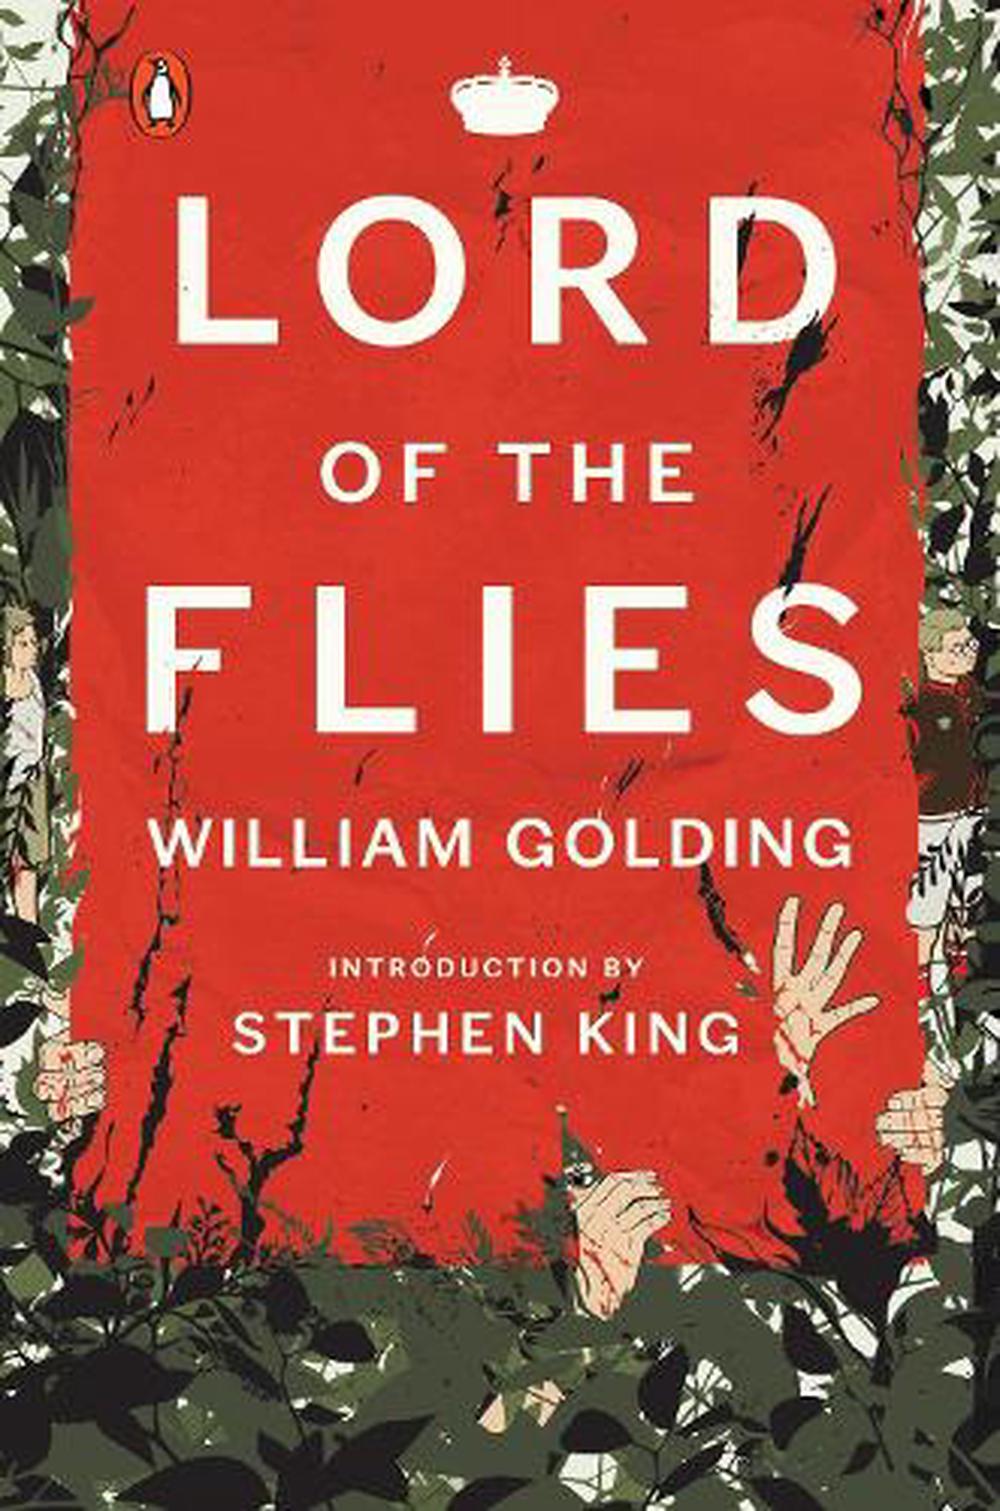 book review on the lord of flies